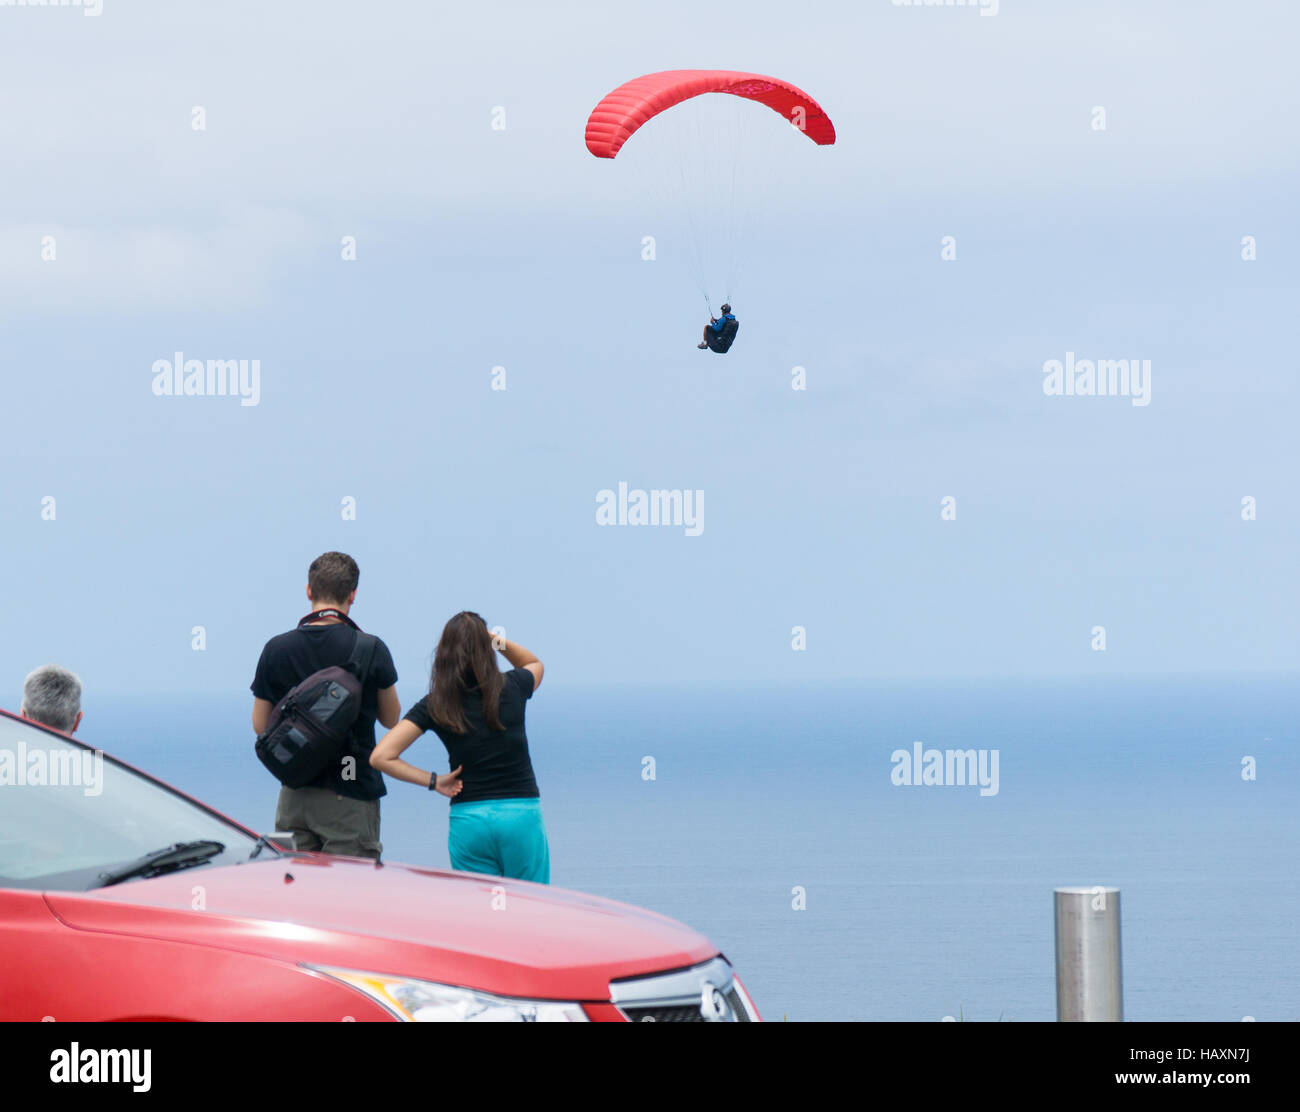 Paragliding at Bald Hill Stanwell Tops in NSW, Australia Stock Photo